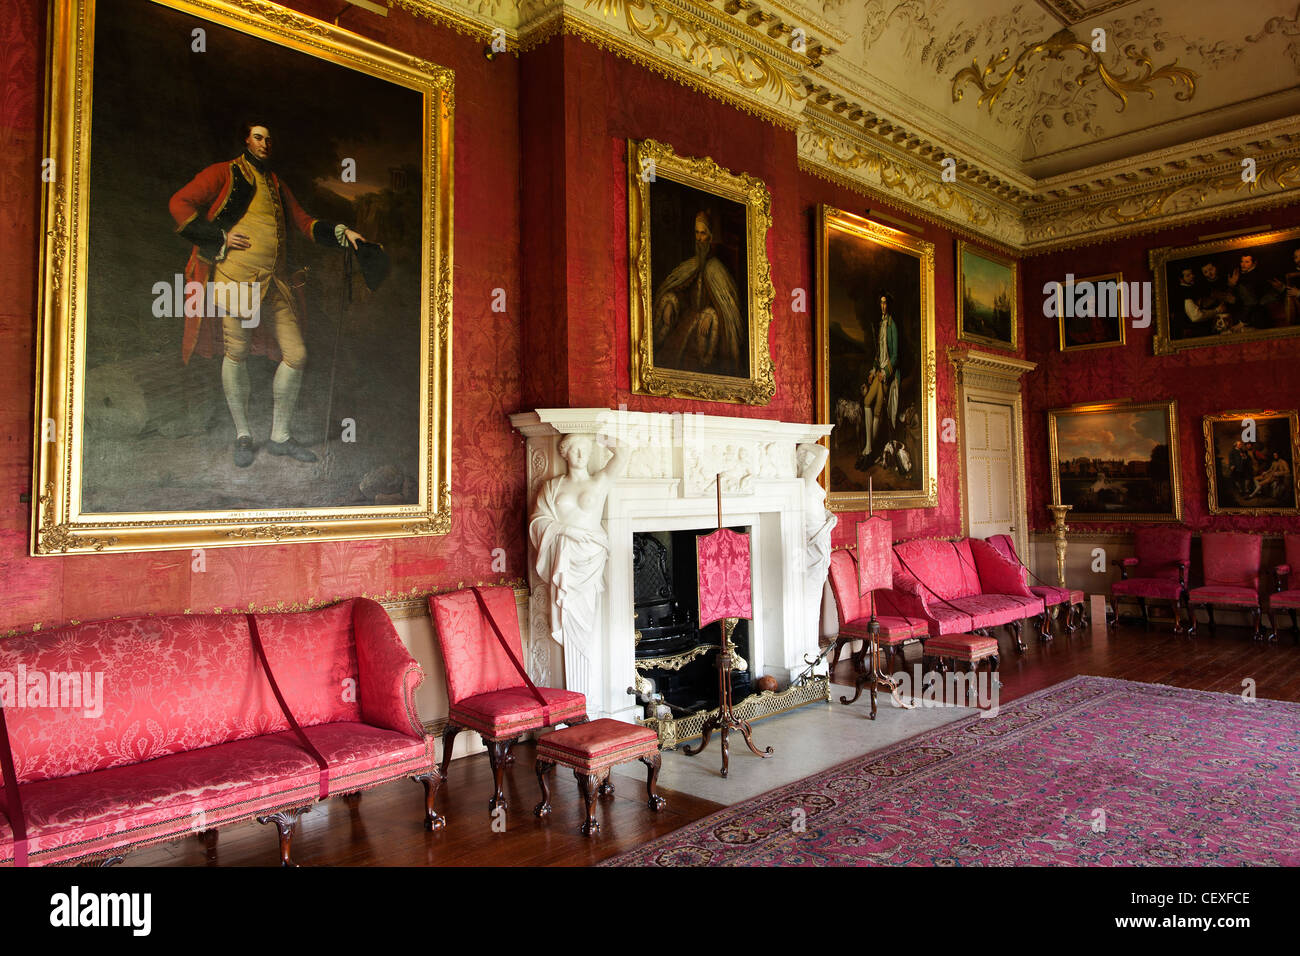 Interior rooms of the stately home of Hopetoun house. Hopetoun house is ...